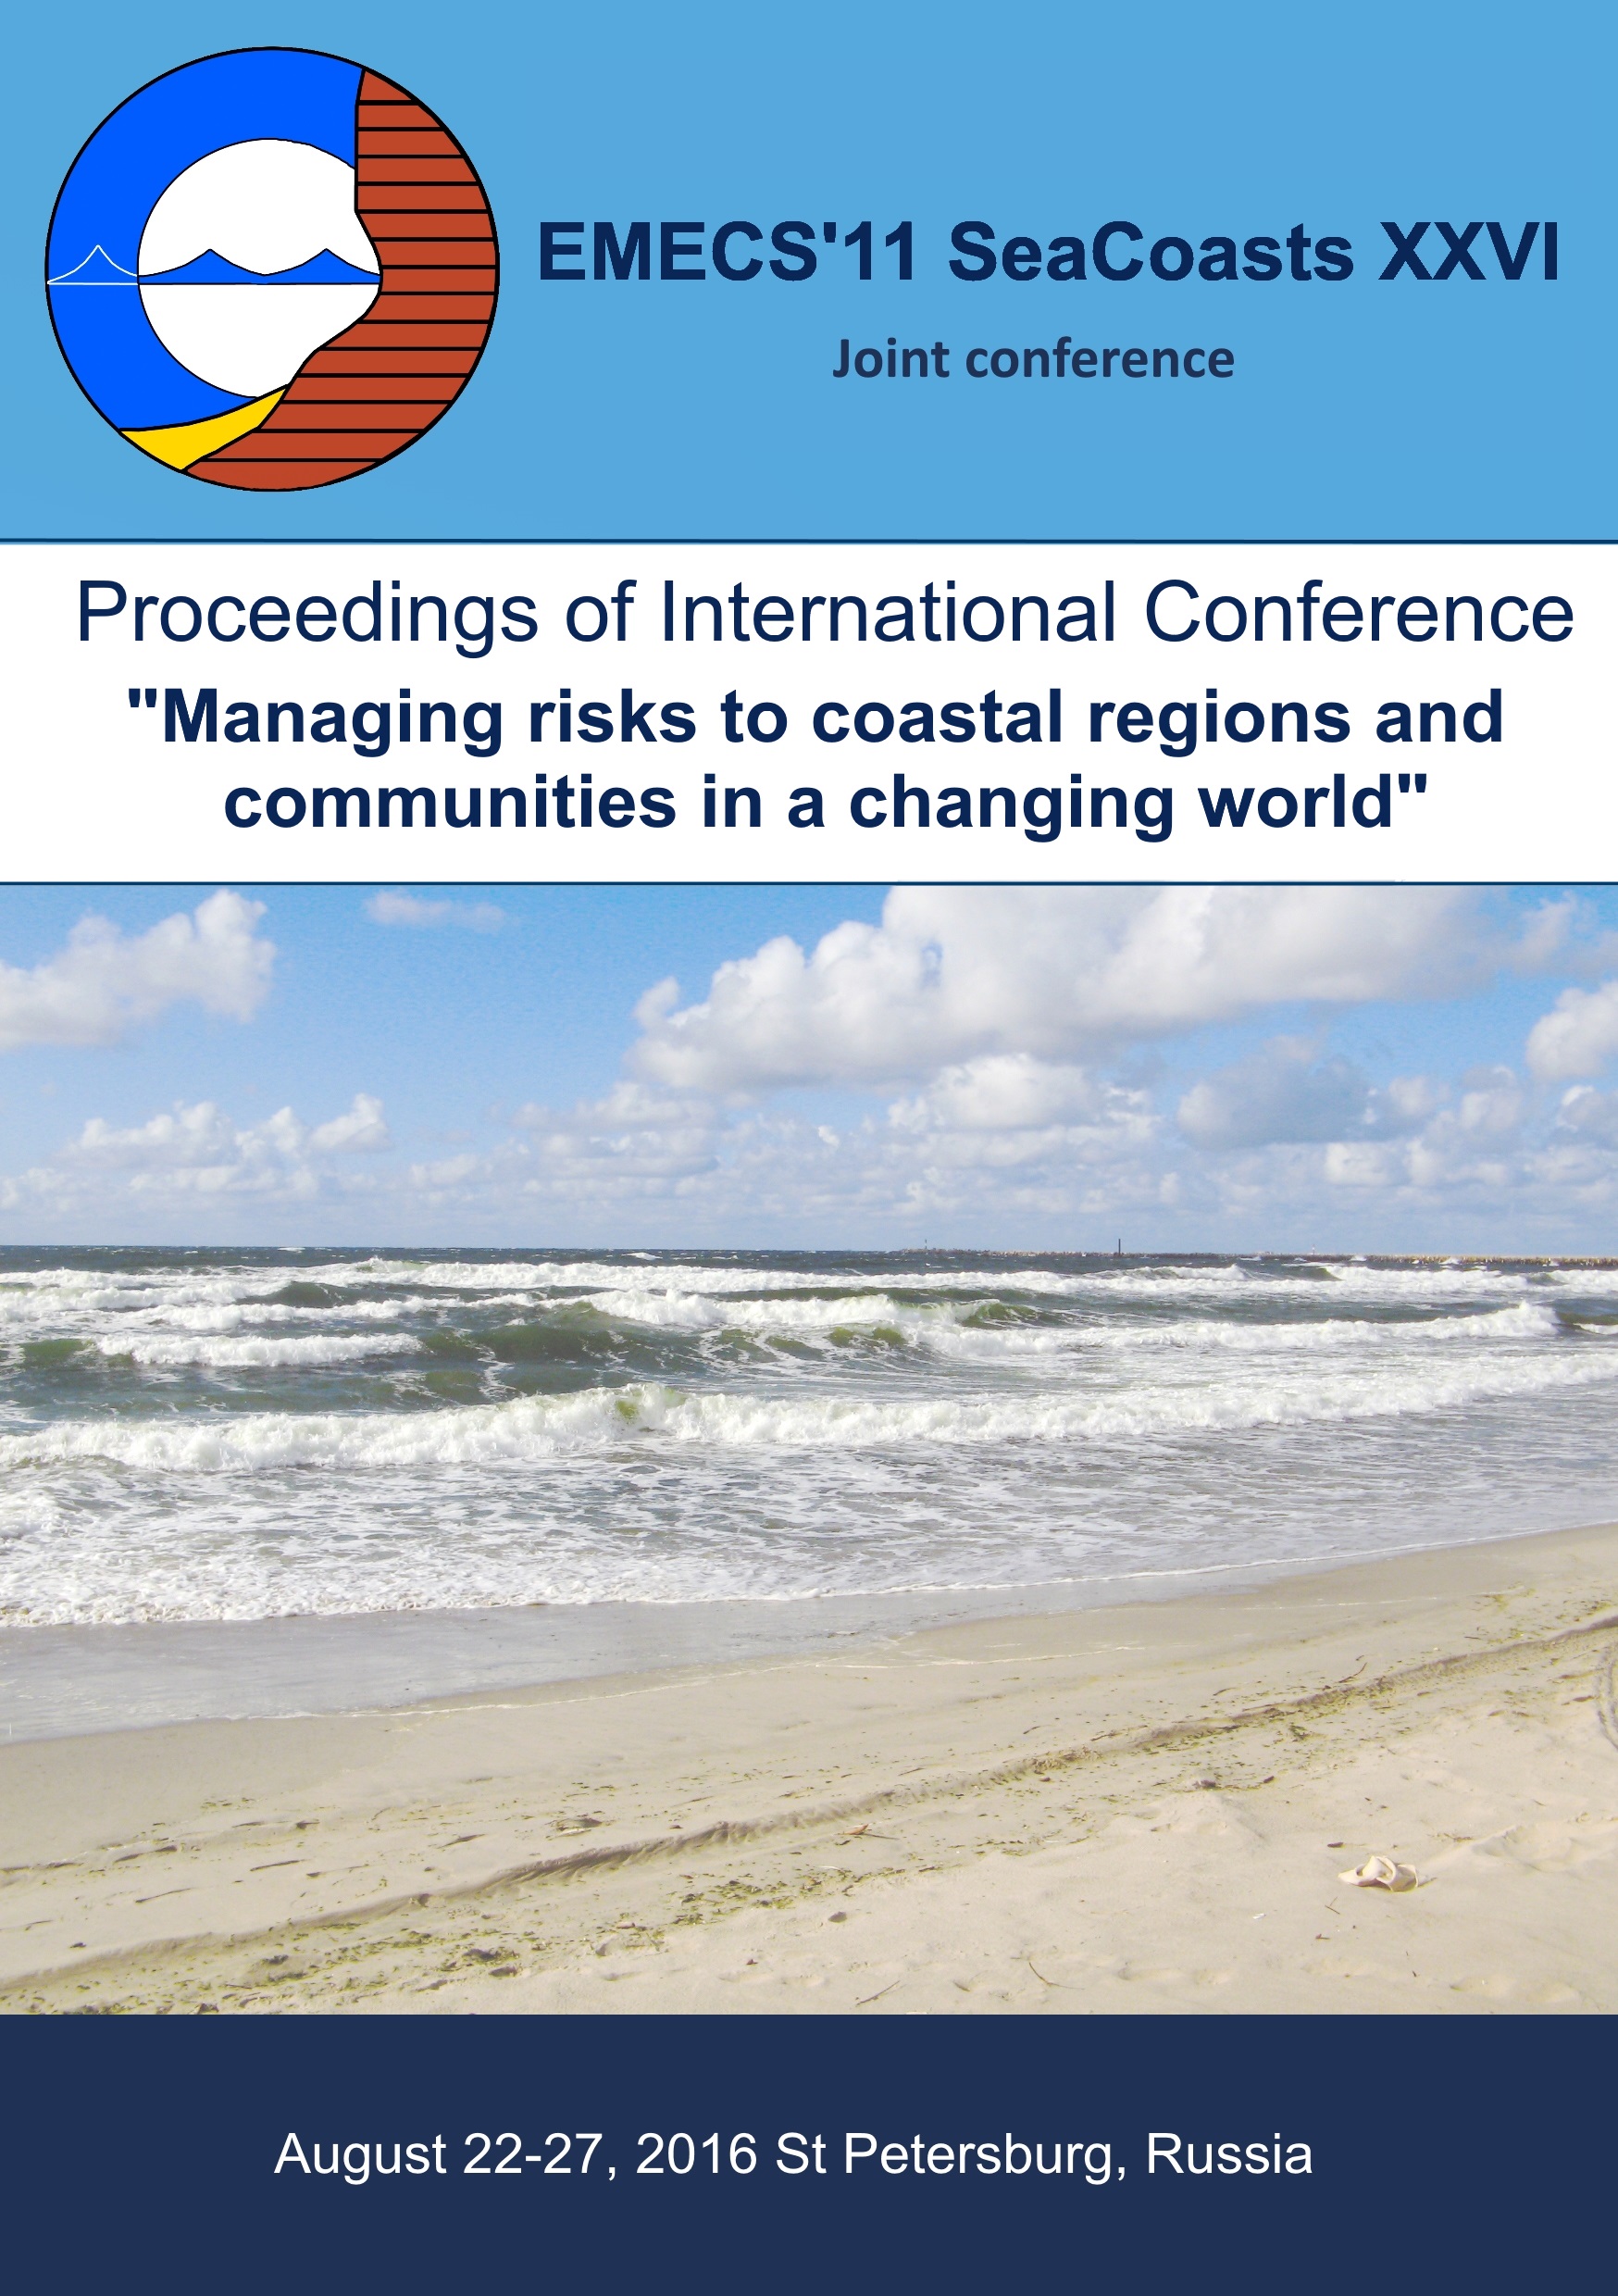                         COASTAL ECOSYSTEMS AND CHANGING ECONOMIC ACTIVITIES: CHALLENGES FOR SUSTAINABILITY TRANSITION
            